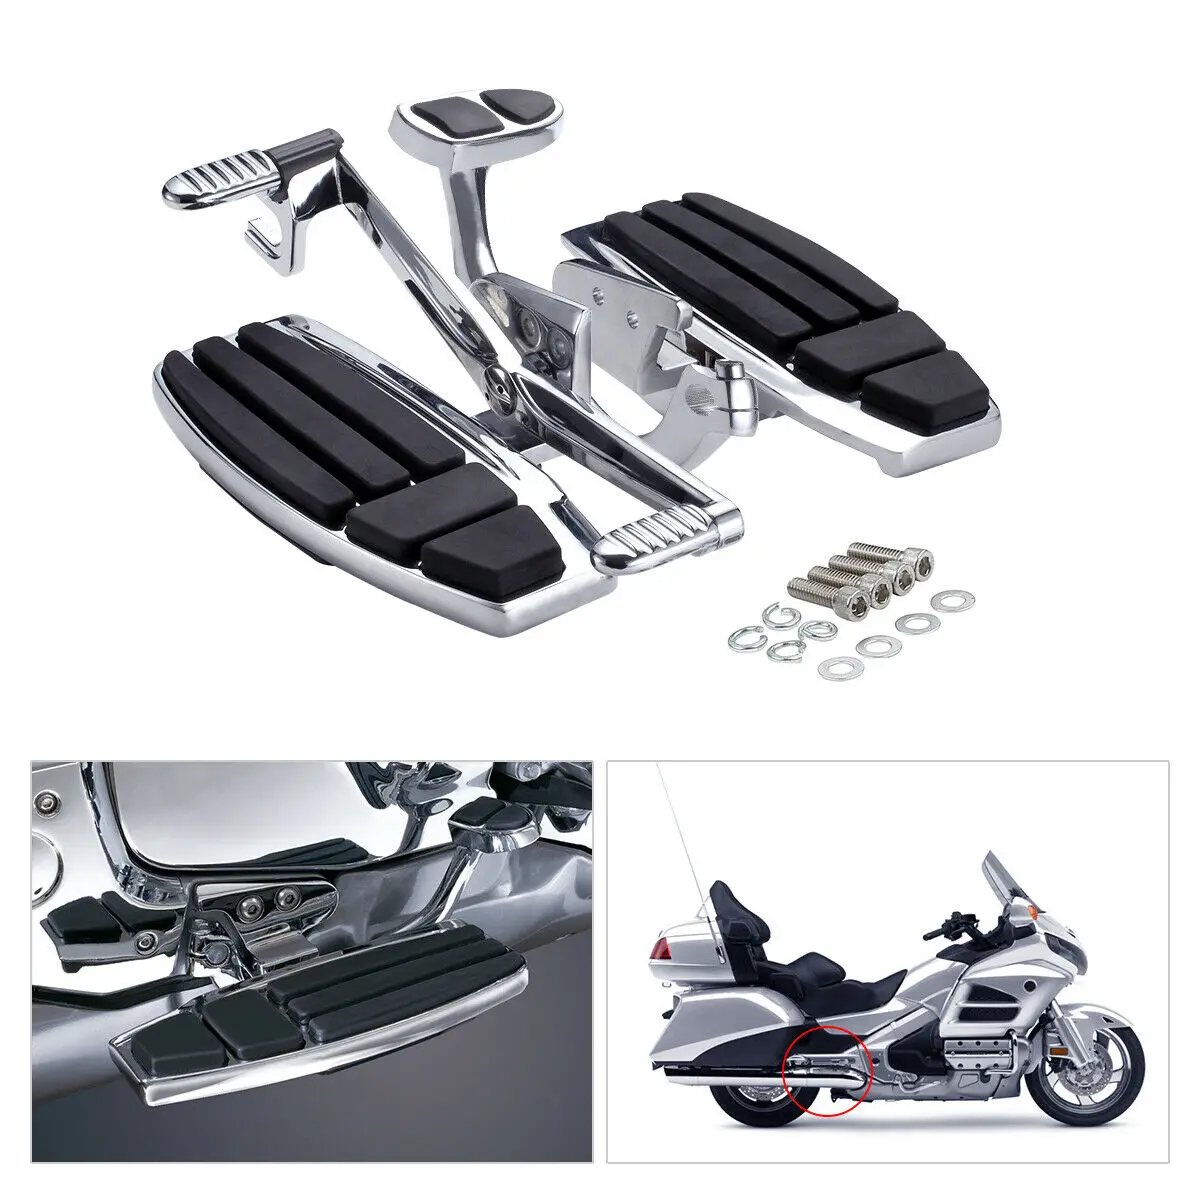 Driver Floorboard Footboard For Honda Gold Wing GL1800 2001-2017 F6B Valkyrie Motorcycle